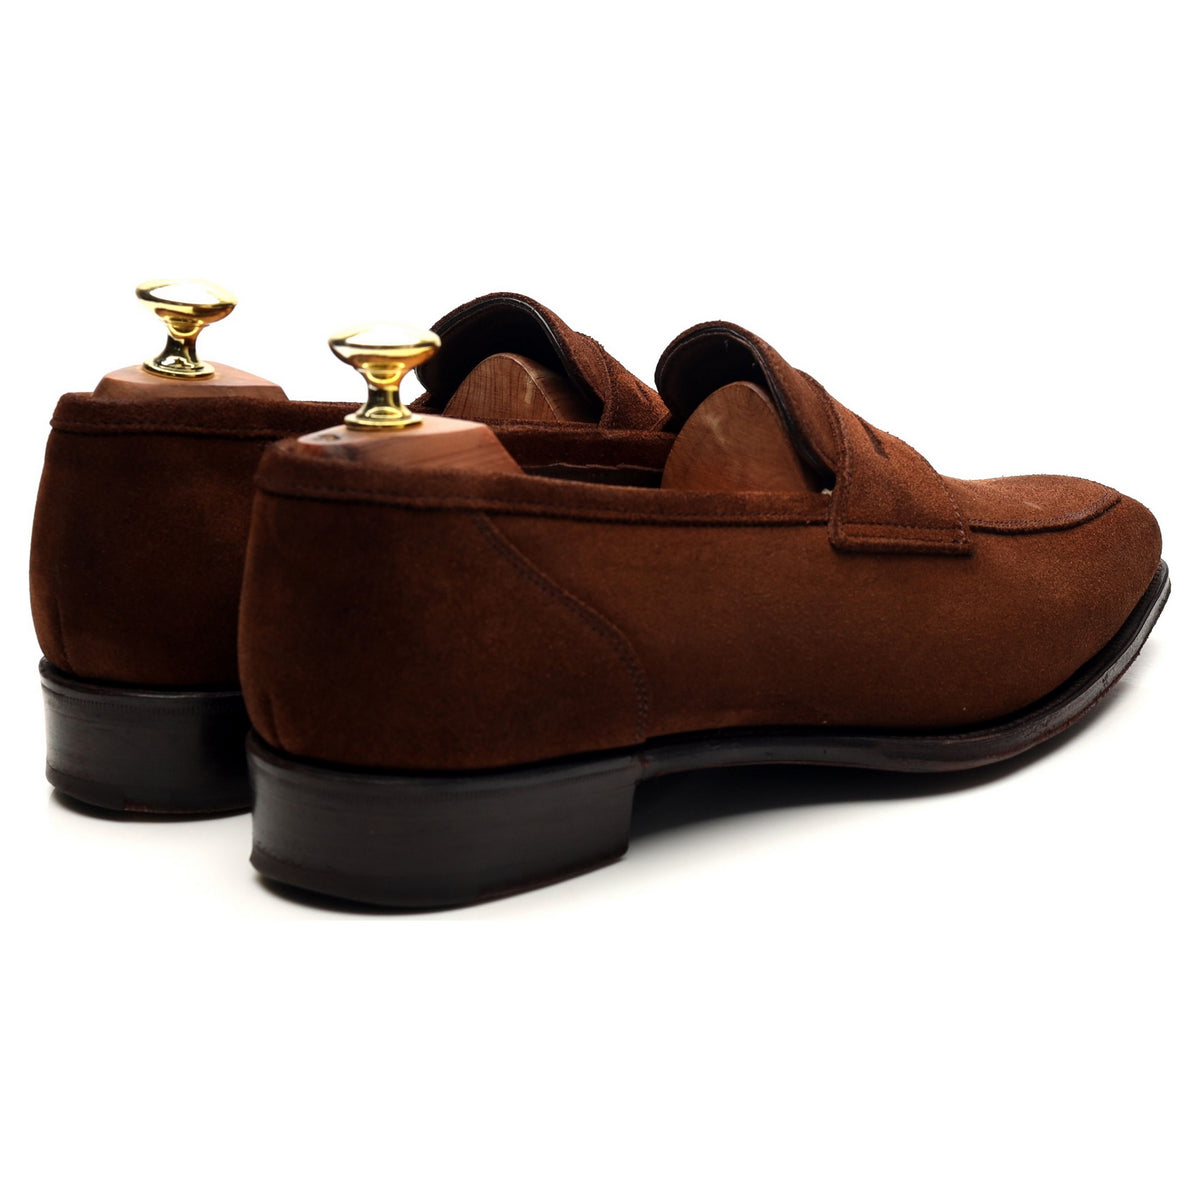 Brown Suede Loafers UK 7 E